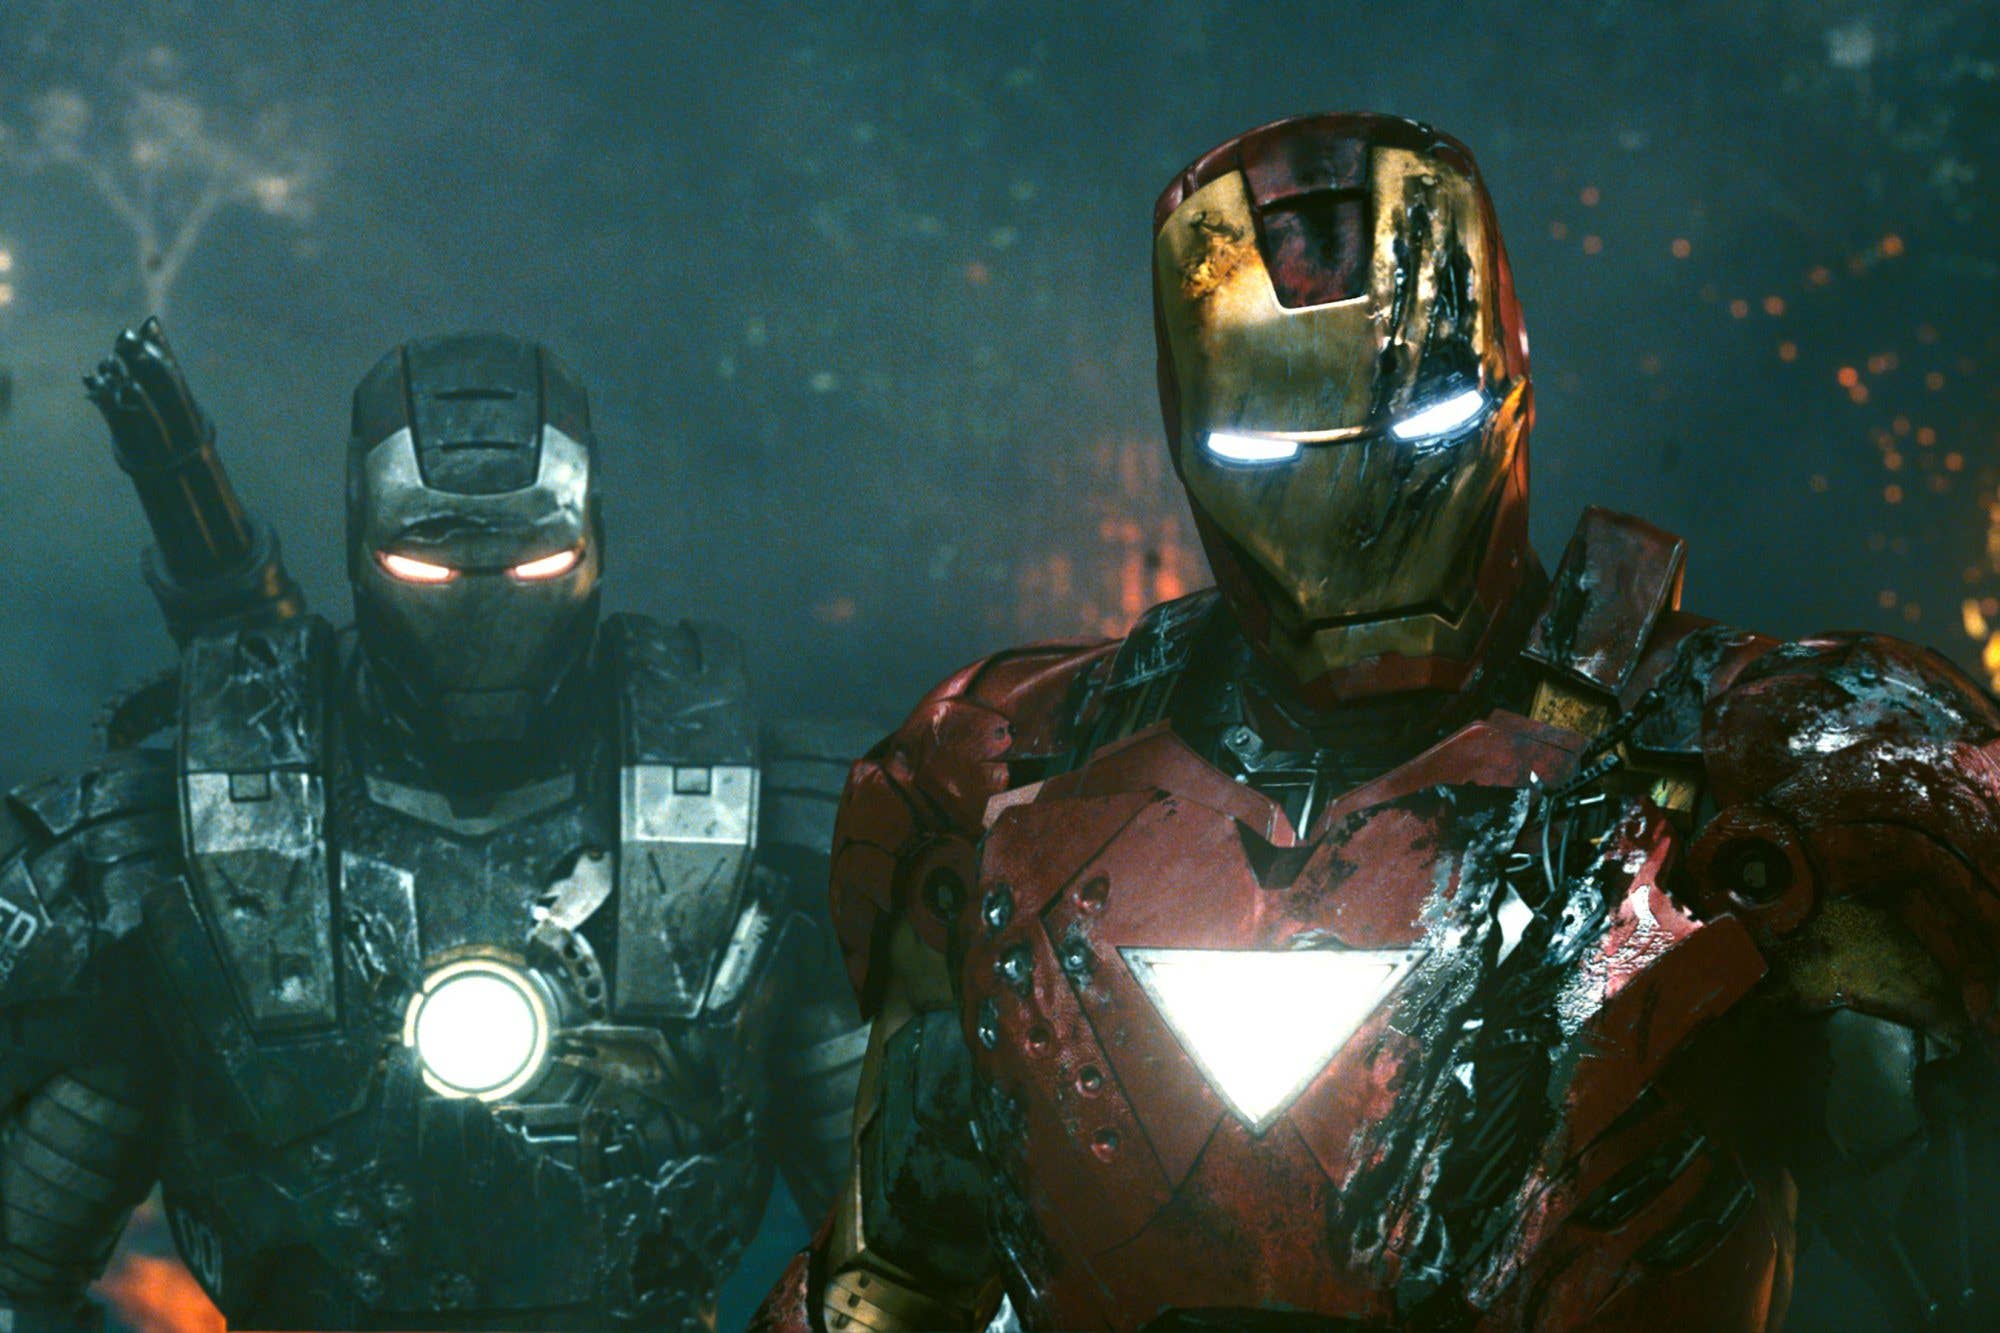 Iron Man 2' Turns 10: 21 Trivia Facts From the Massive Marvel Sequel